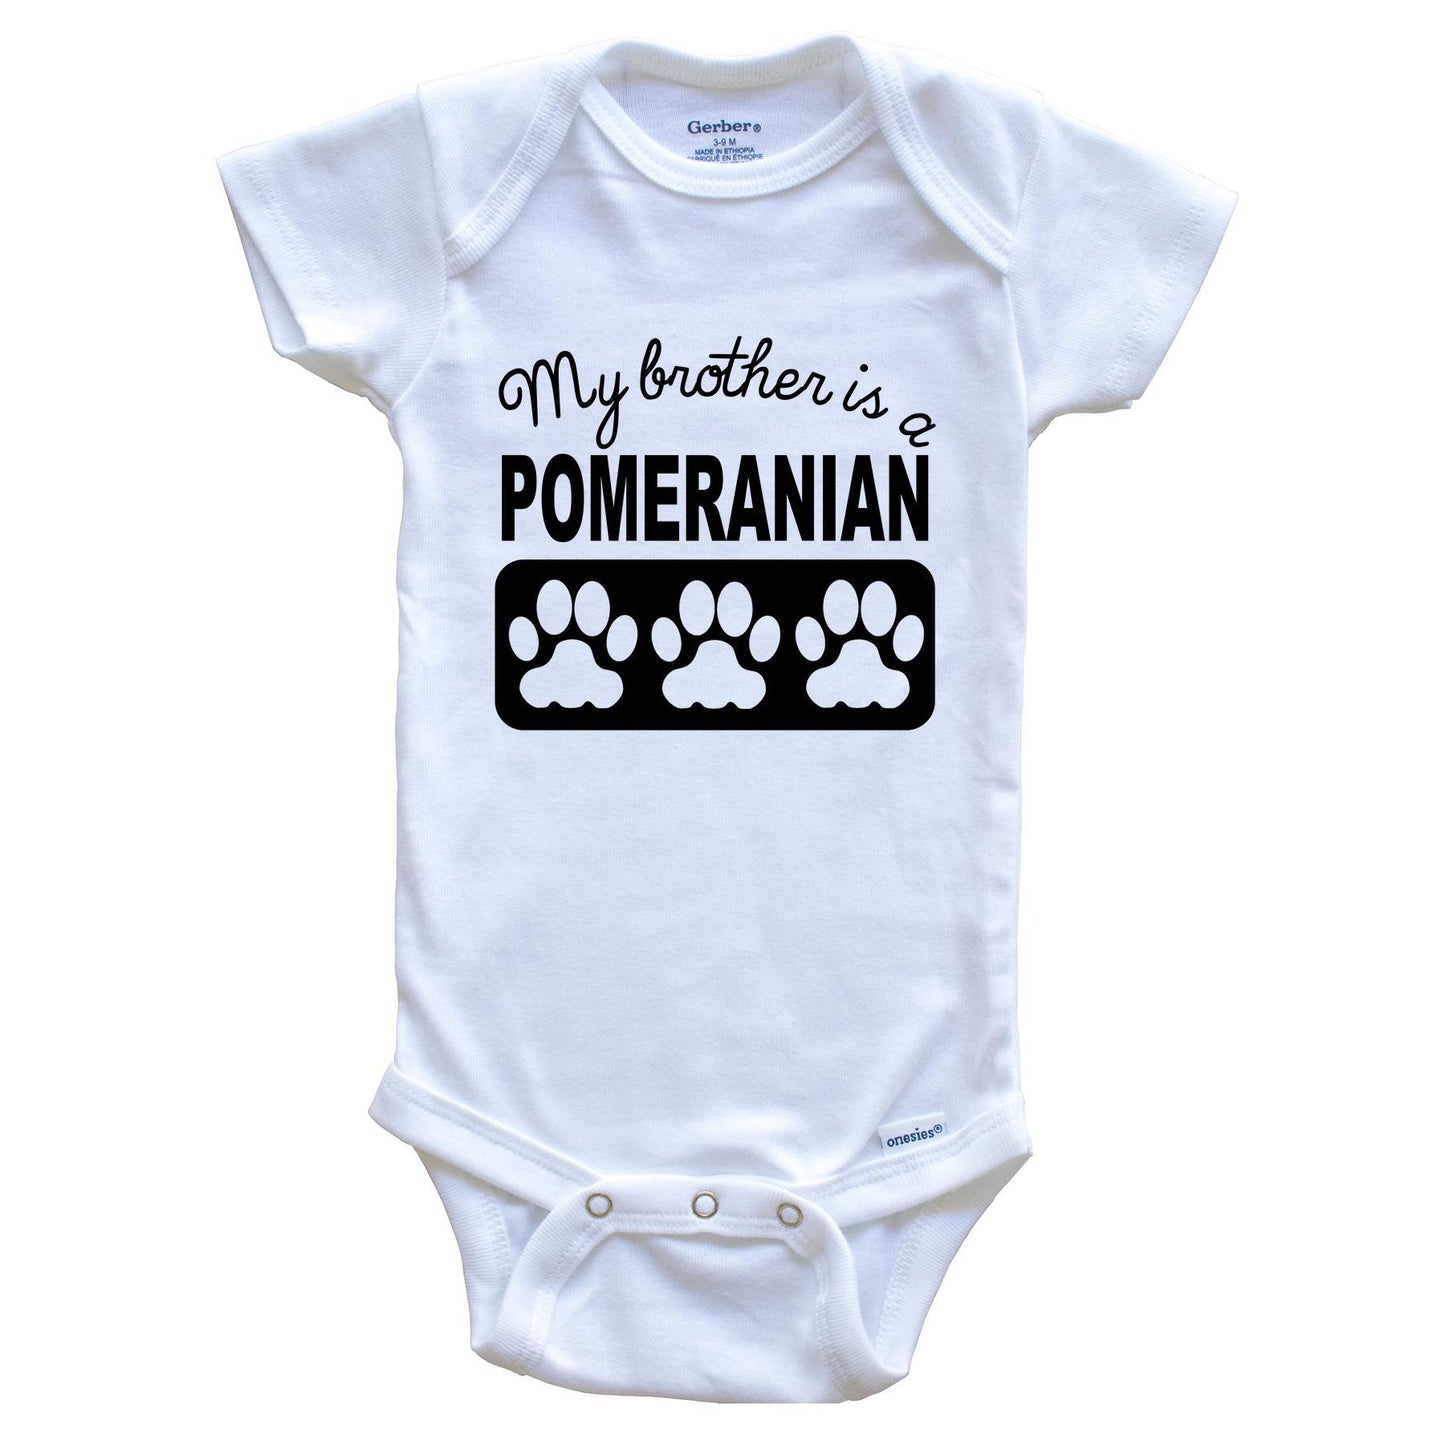 My Brother Is A Pomeranian Baby Onesie